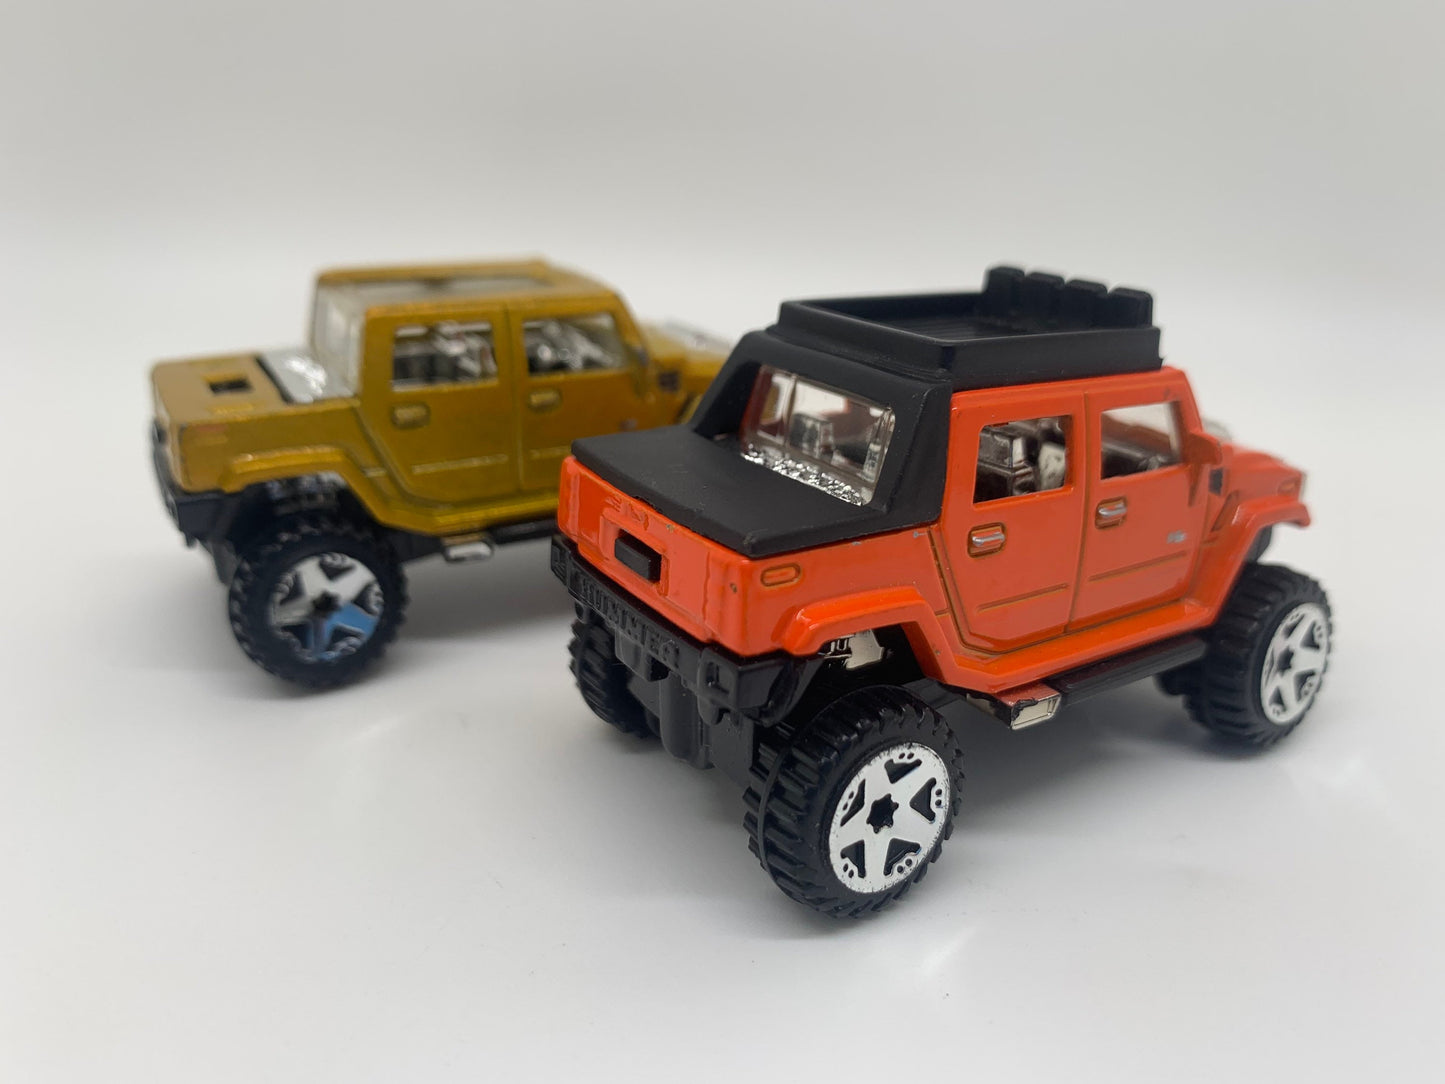 H2 Hummer - Diecast Vintage - Diecast Collectible - Miniature Model Toy Car - Hot Wheels Car - Hot Wheels